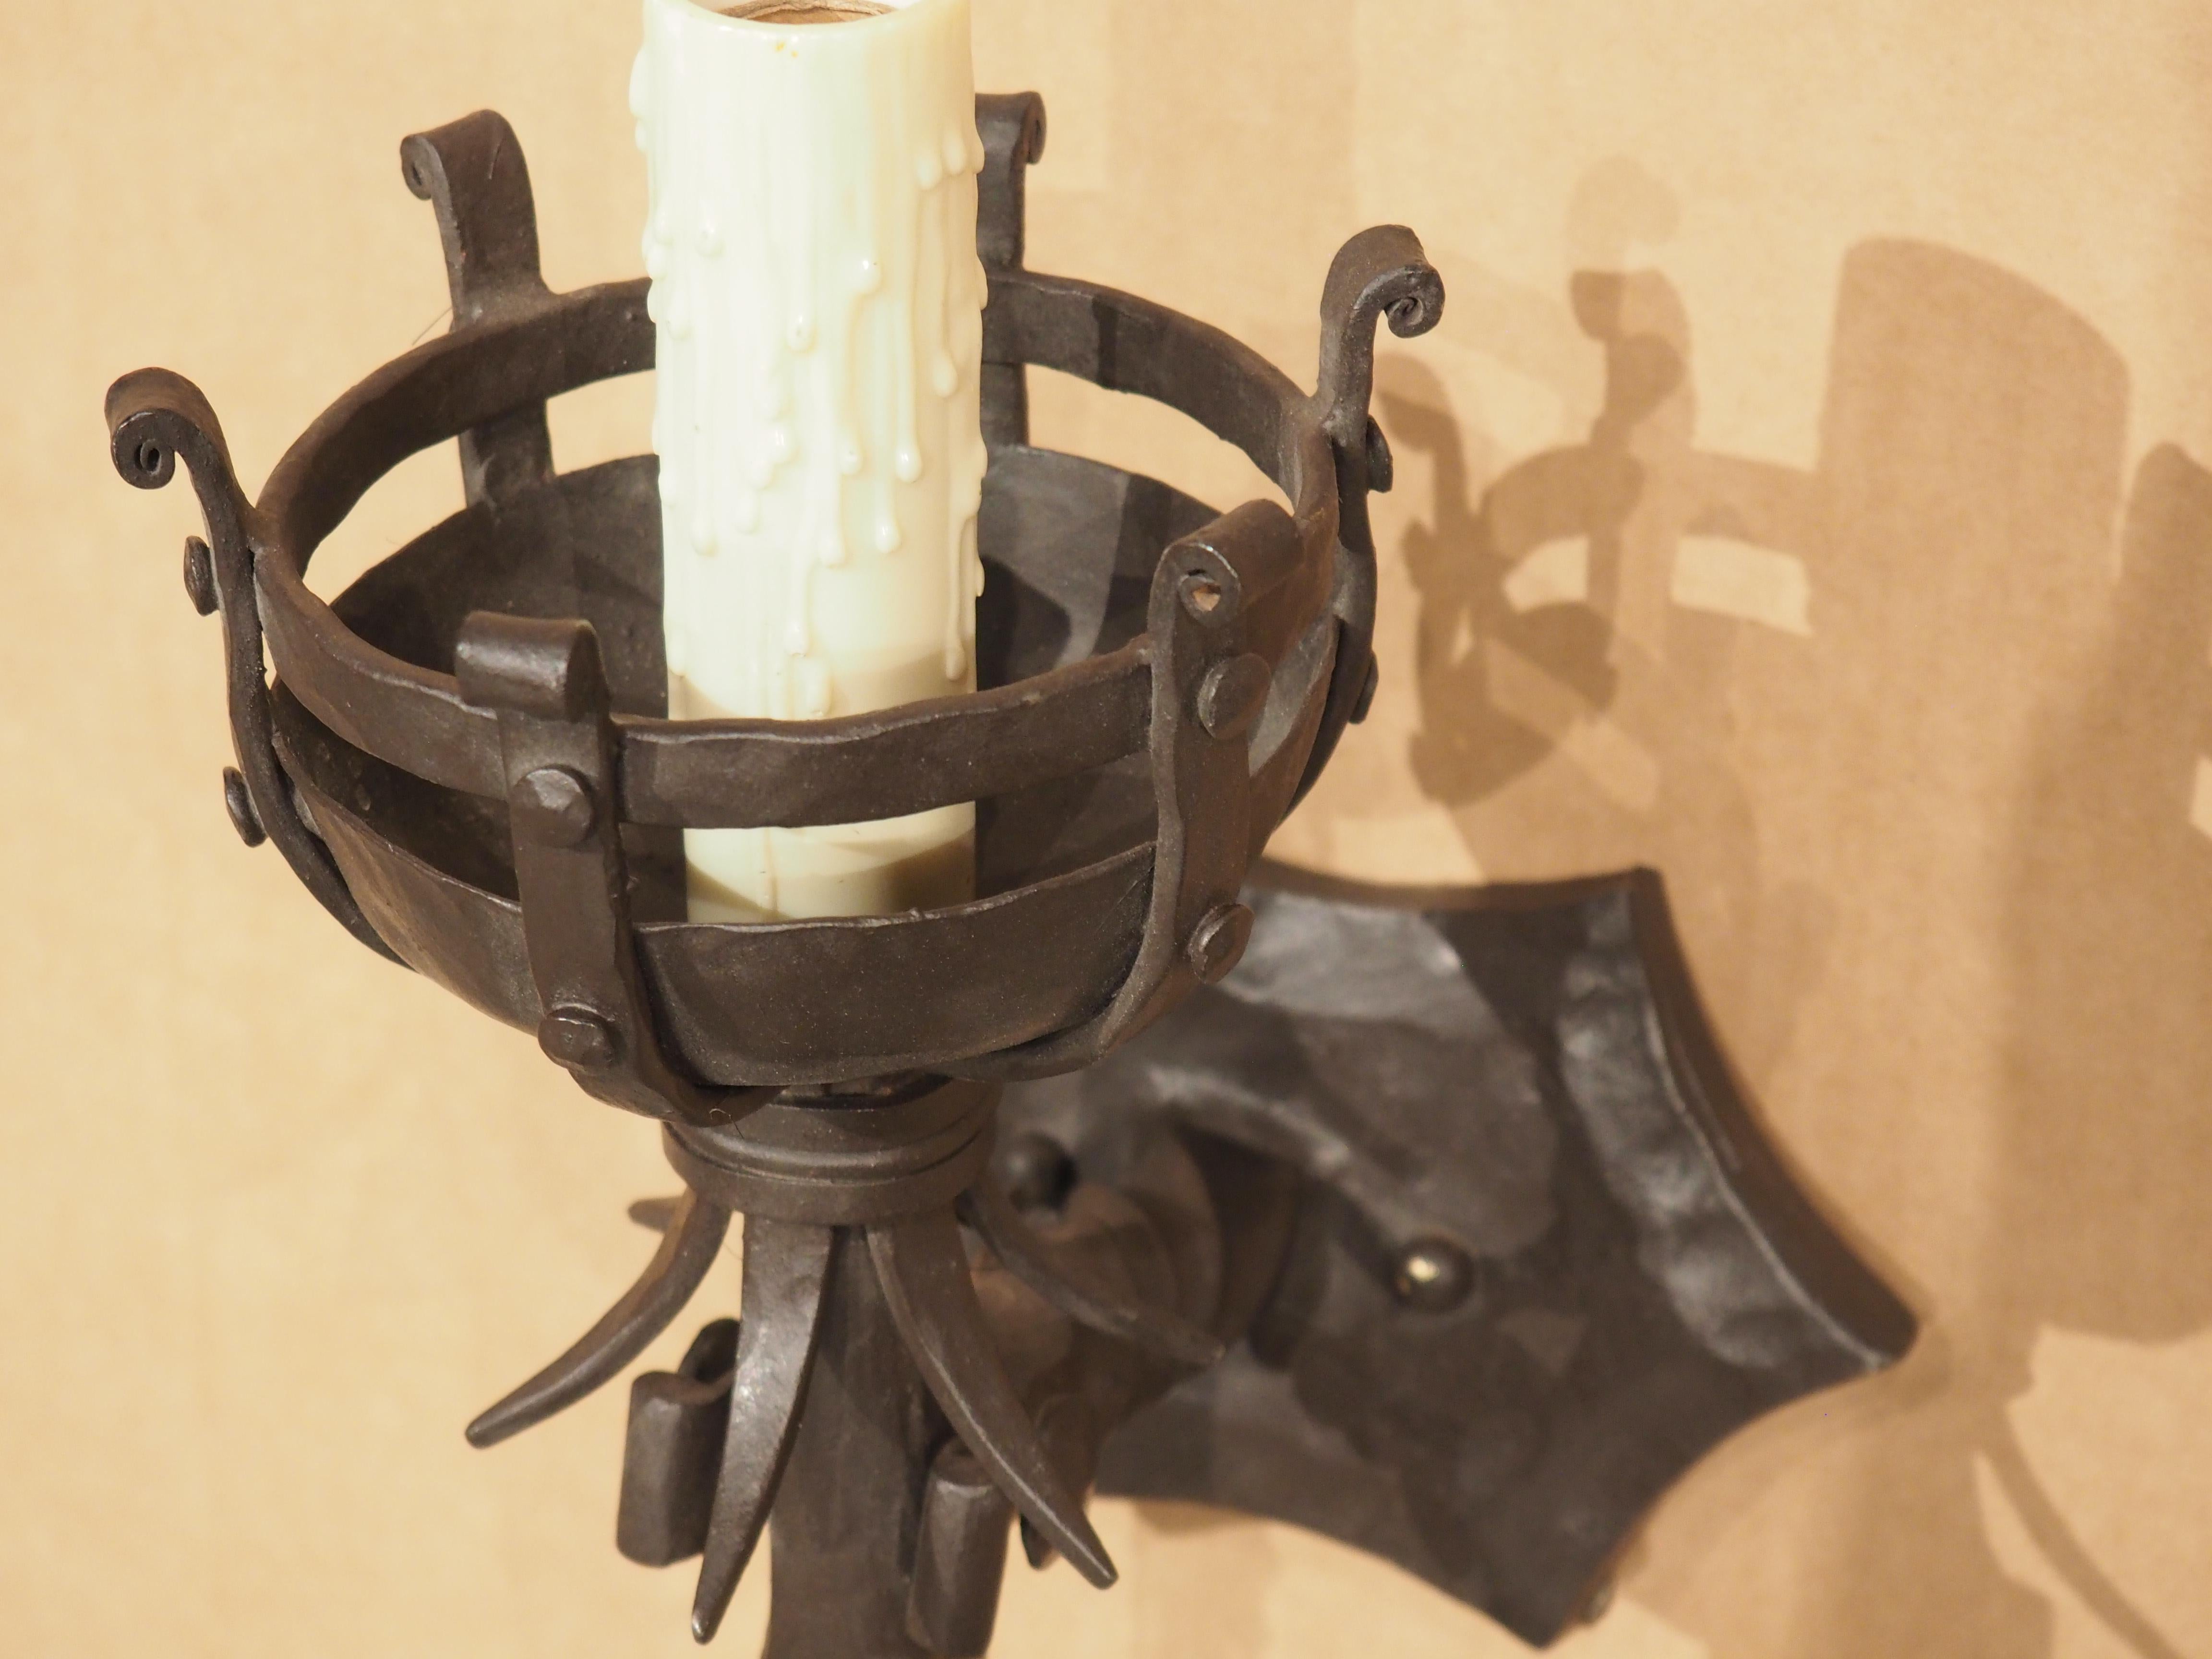 Resembling a Medieval-style castle torch, this single wrought iron wall sconce blends functionality with a unique aesthetic appeal. An expansive saucer bobeche encompassed within a basket-like cup comprised of scrolled iron supports houses an